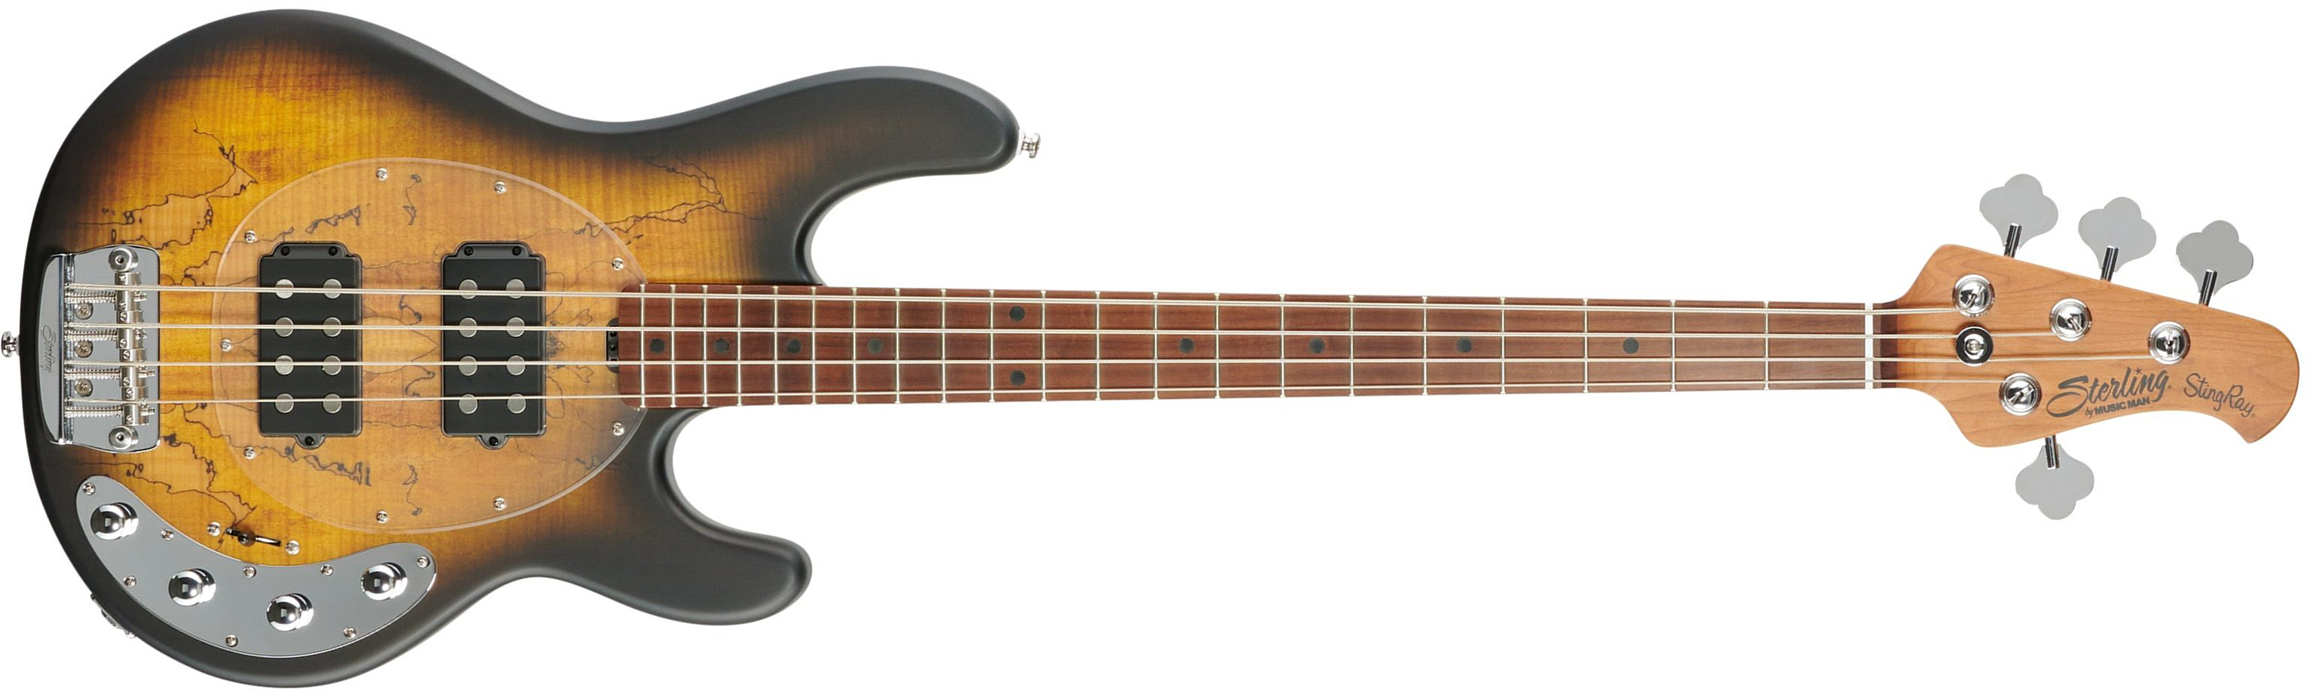 Sterling By Musicman Stingray Ray34hhsm Active Rw +housse - Natural Burl Satin - Solidbody E-bass - Main picture